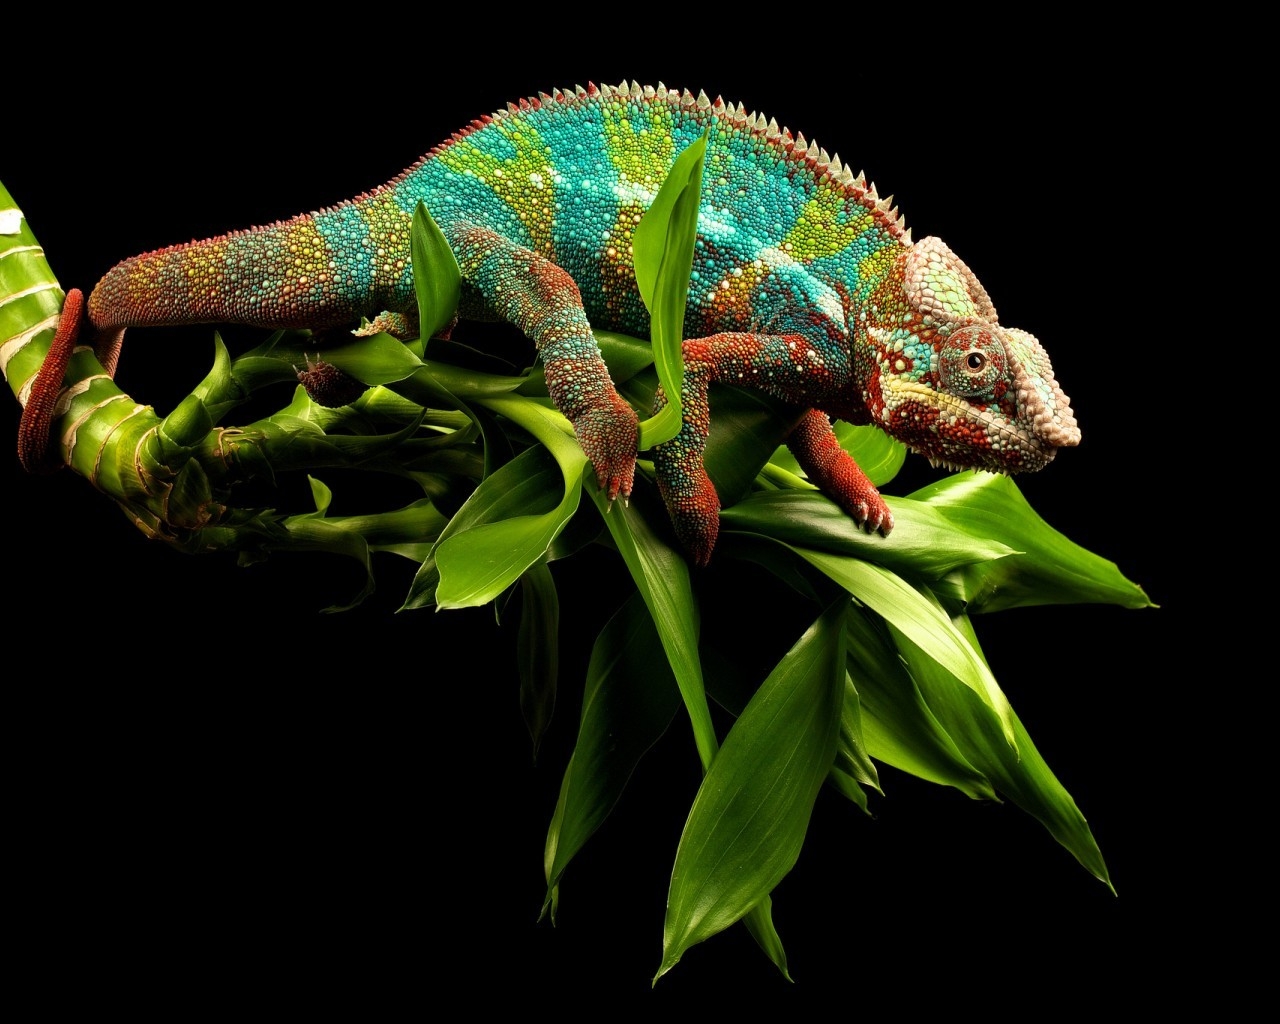 Young Chameleon for 1280 x 1024 resolution